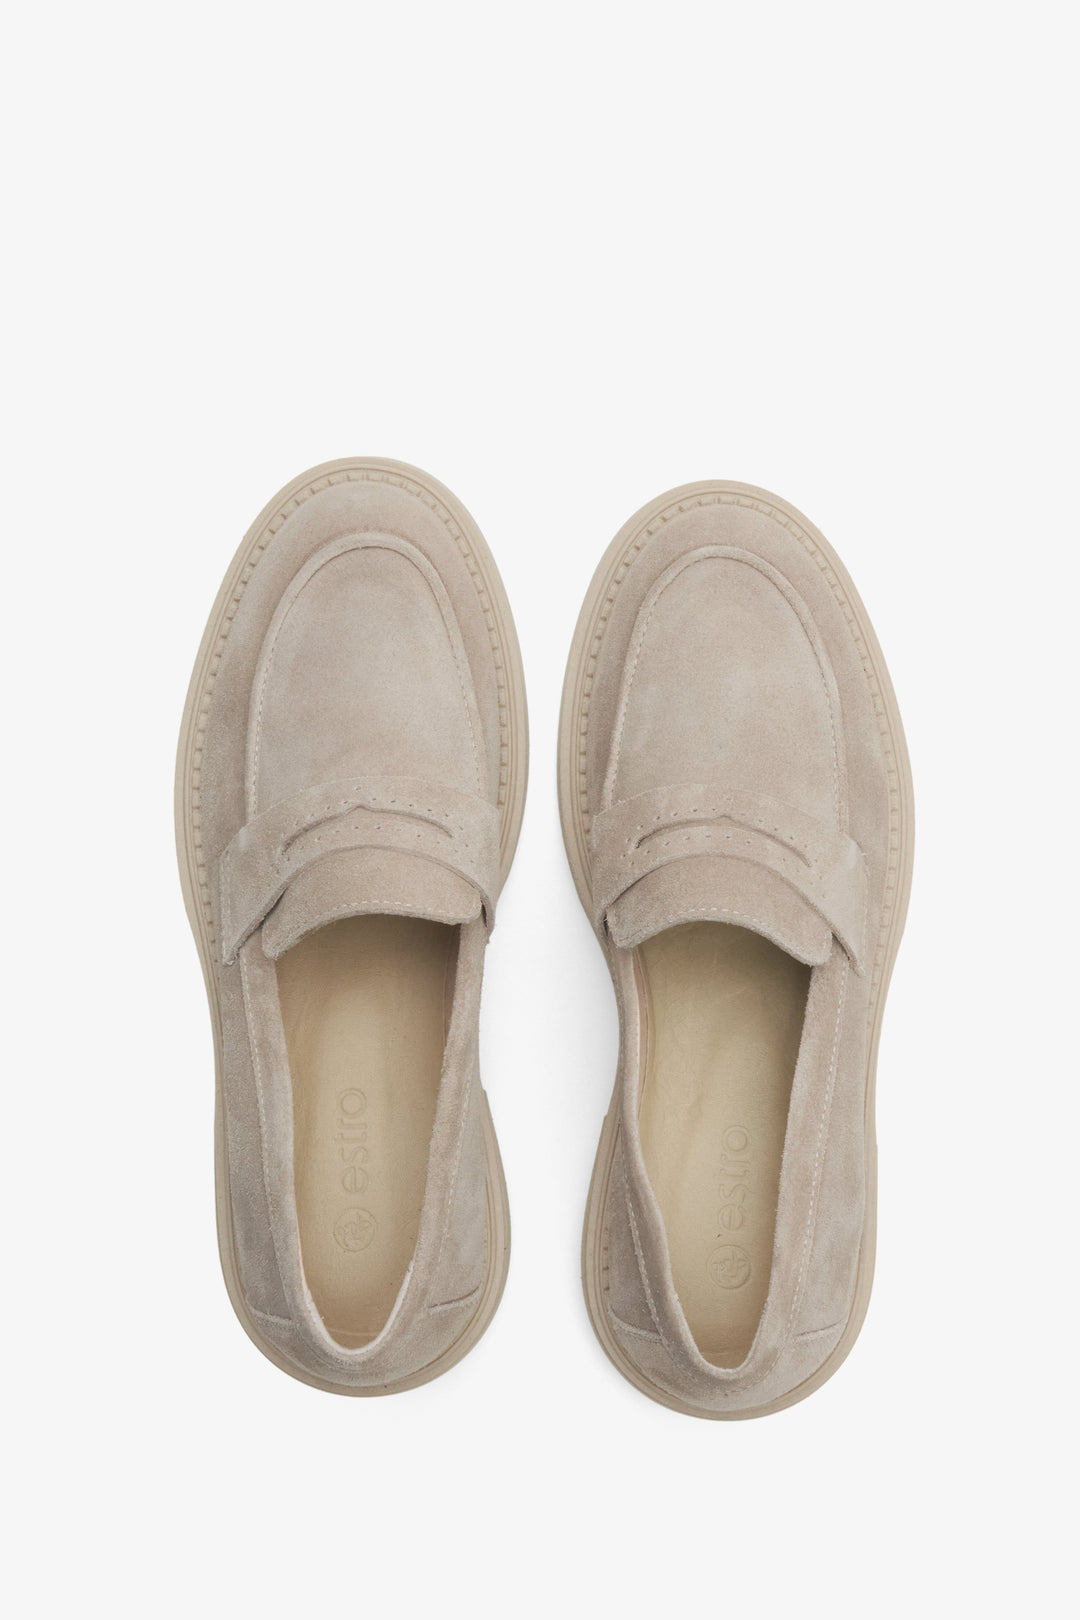 Beige velour loafers for women Estro - presentation of the model from above.